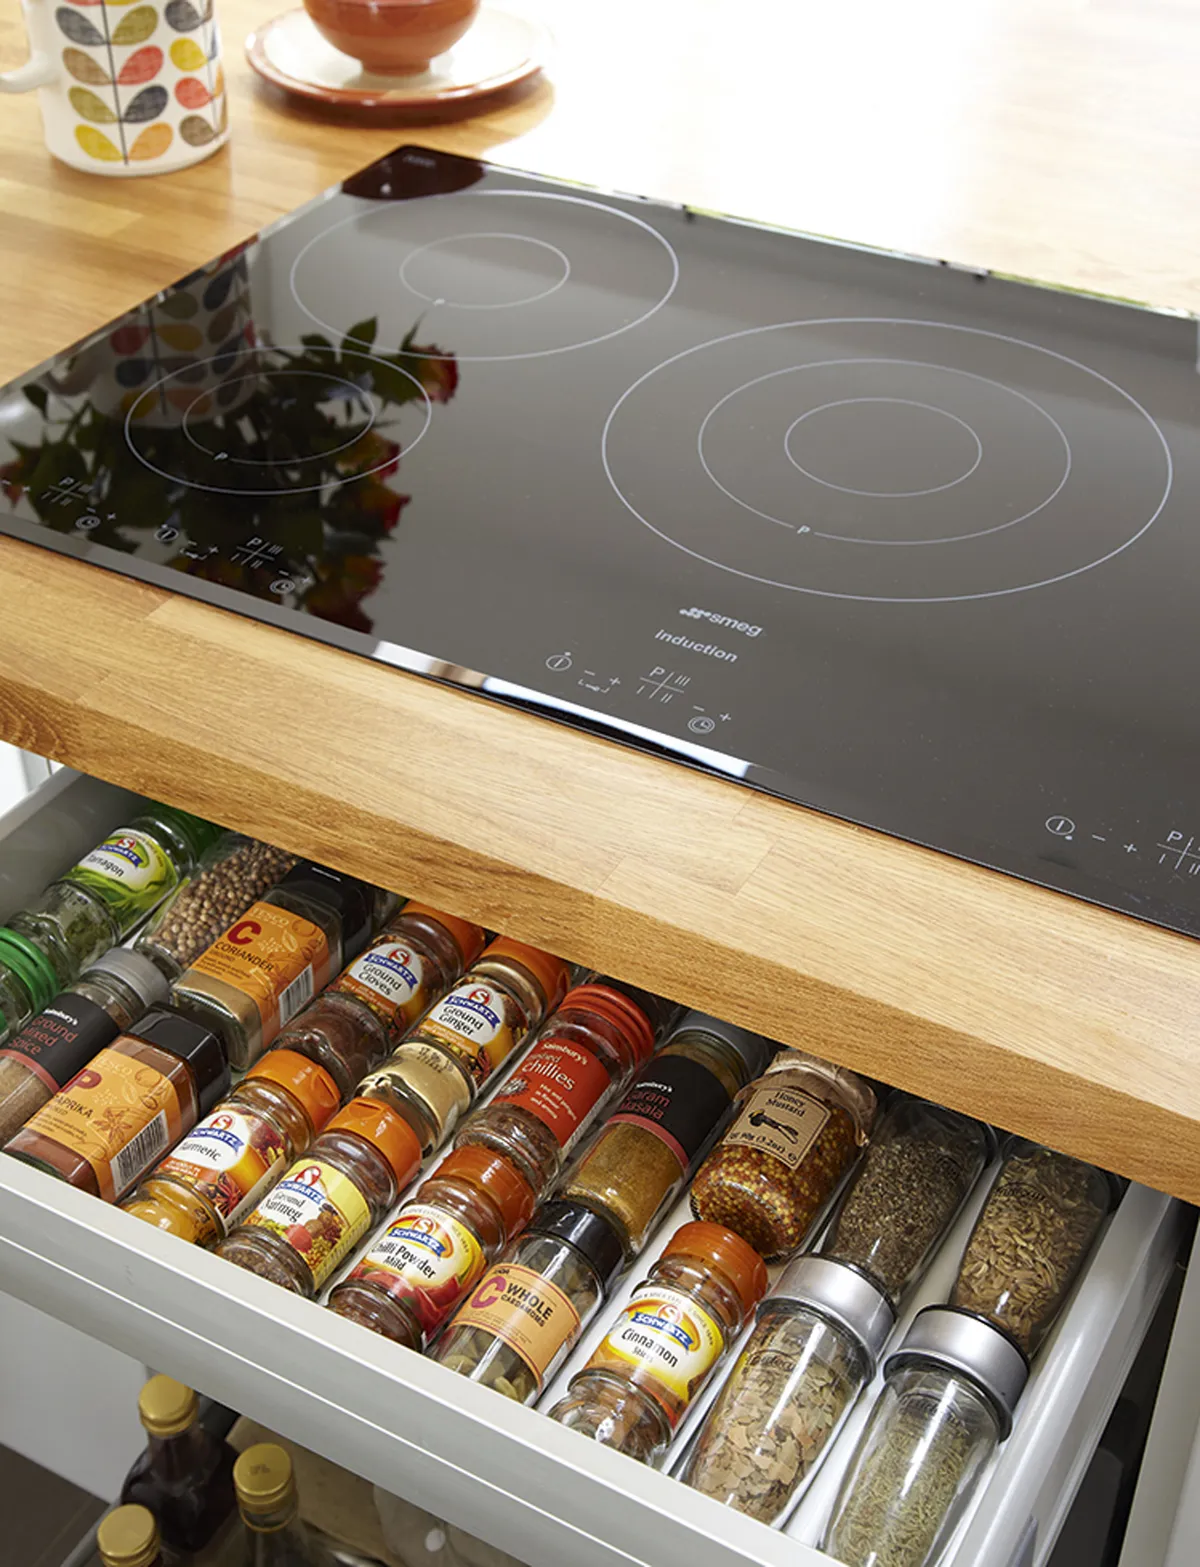 Julie has been clever with space-saving ideas, including installing a hob in the island and a spice drawer underneath